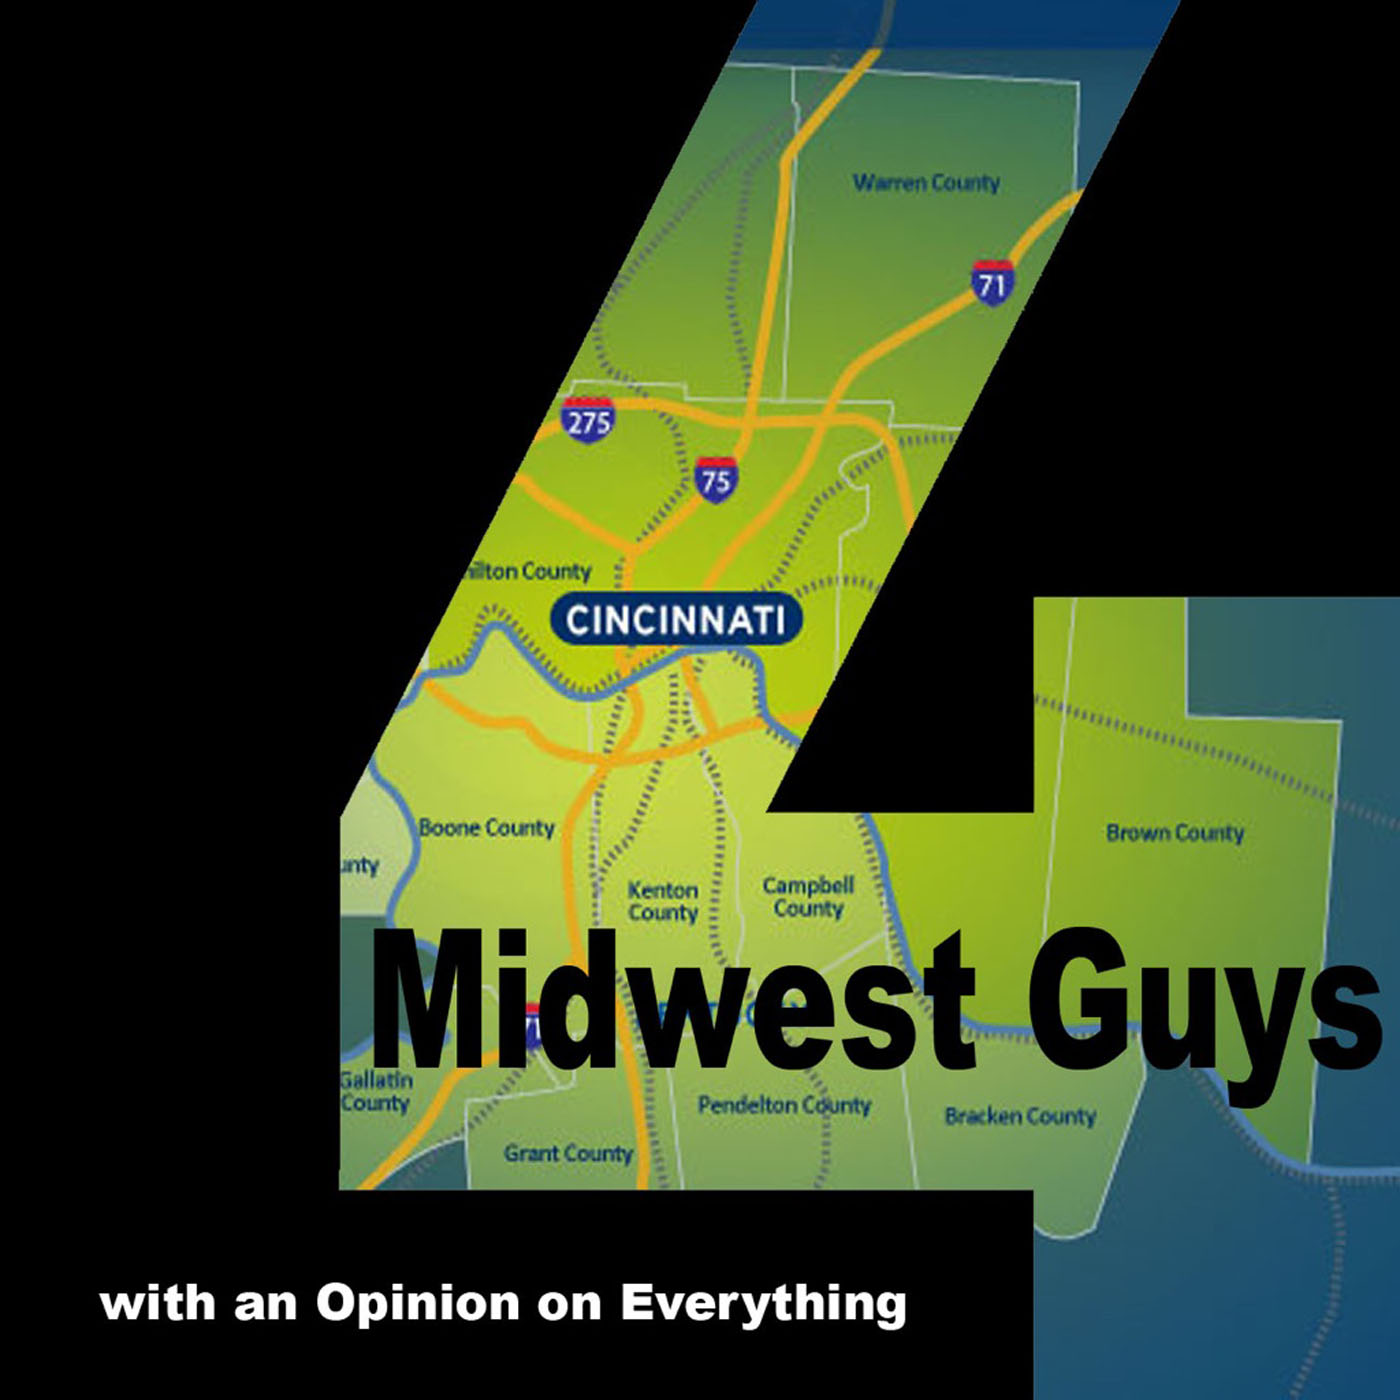 4 Midwest Guys Episode 2